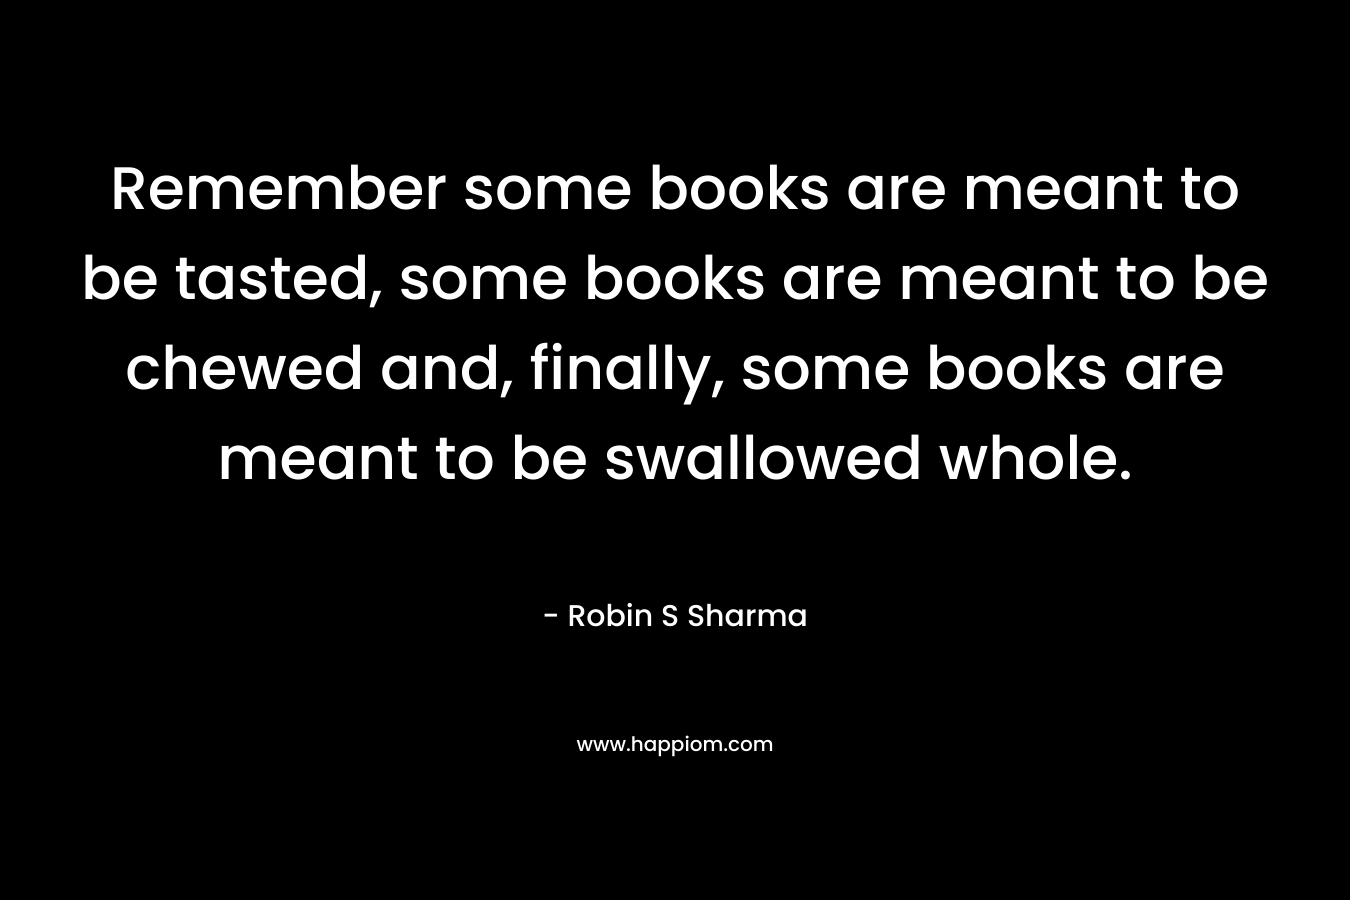 Remember some books are meant to be tasted, some books are meant to be chewed and, finally, some books are meant to be swallowed whole.